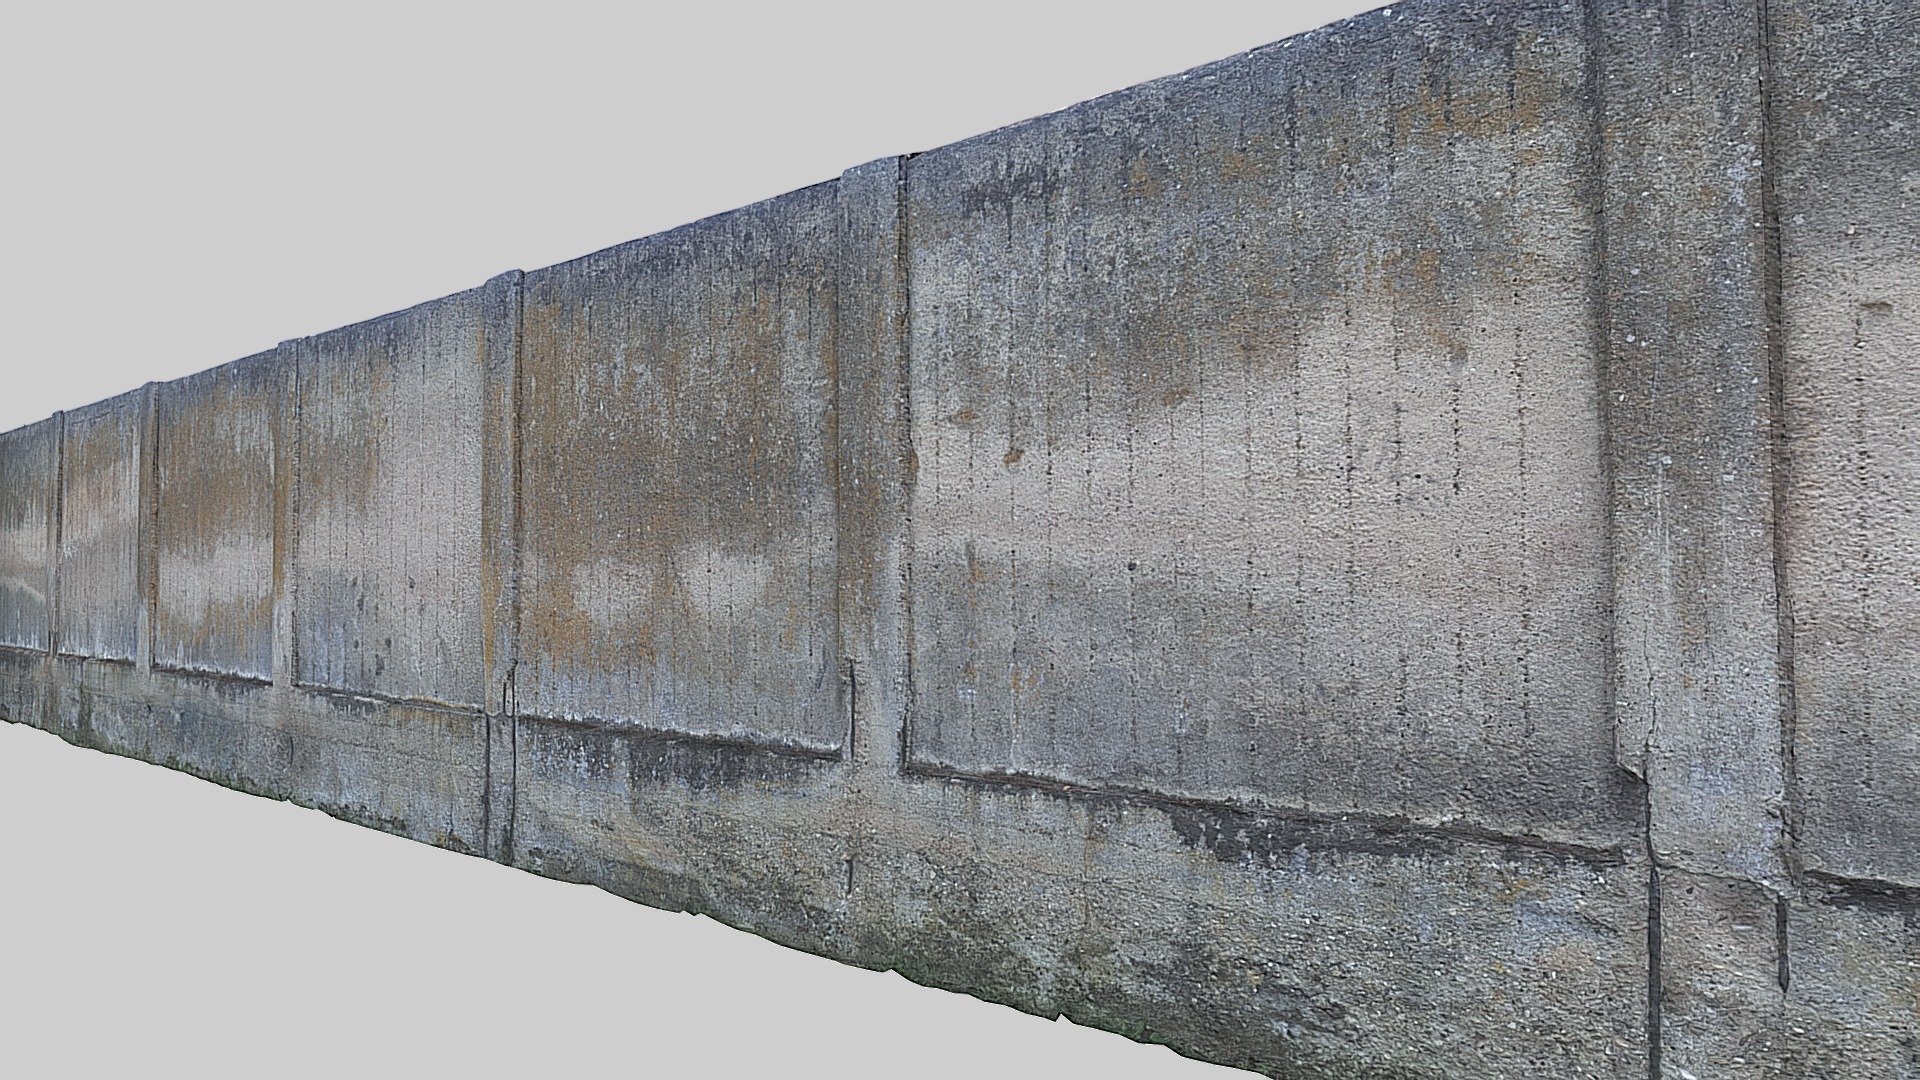 Long dirty reinforced concrete fence

2x8k texture 

spring season

location : Slovakia

3d scan made of 199 photos @ Samsung Galaxy A33 5G - Long dirty reinforced concrete fence - Download Free 3D model by Оrрндп ЯТG (@orphanrtg) 3d model